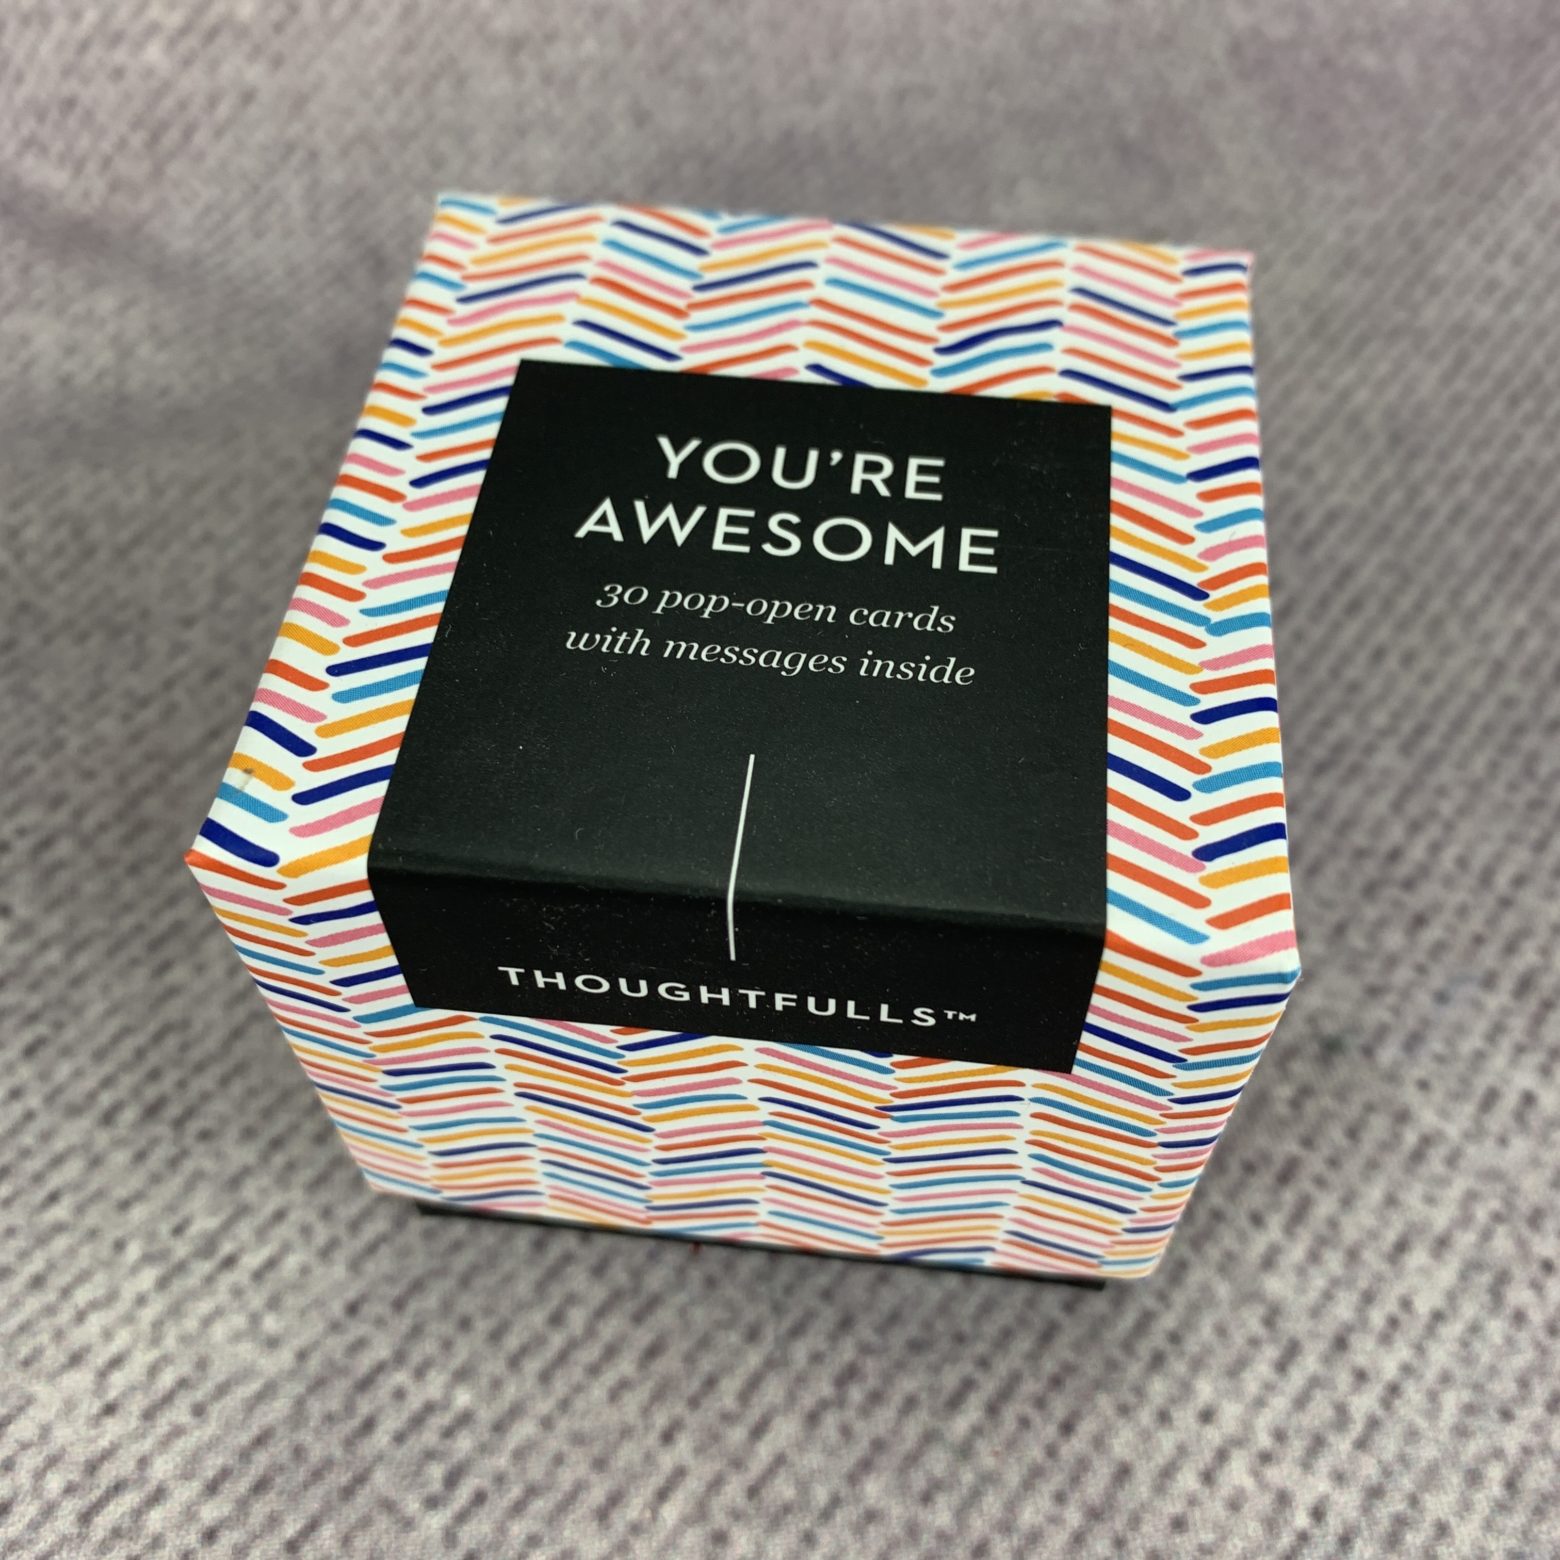 You're Awesome - Thoughtfulls Box of Pop Open Cards